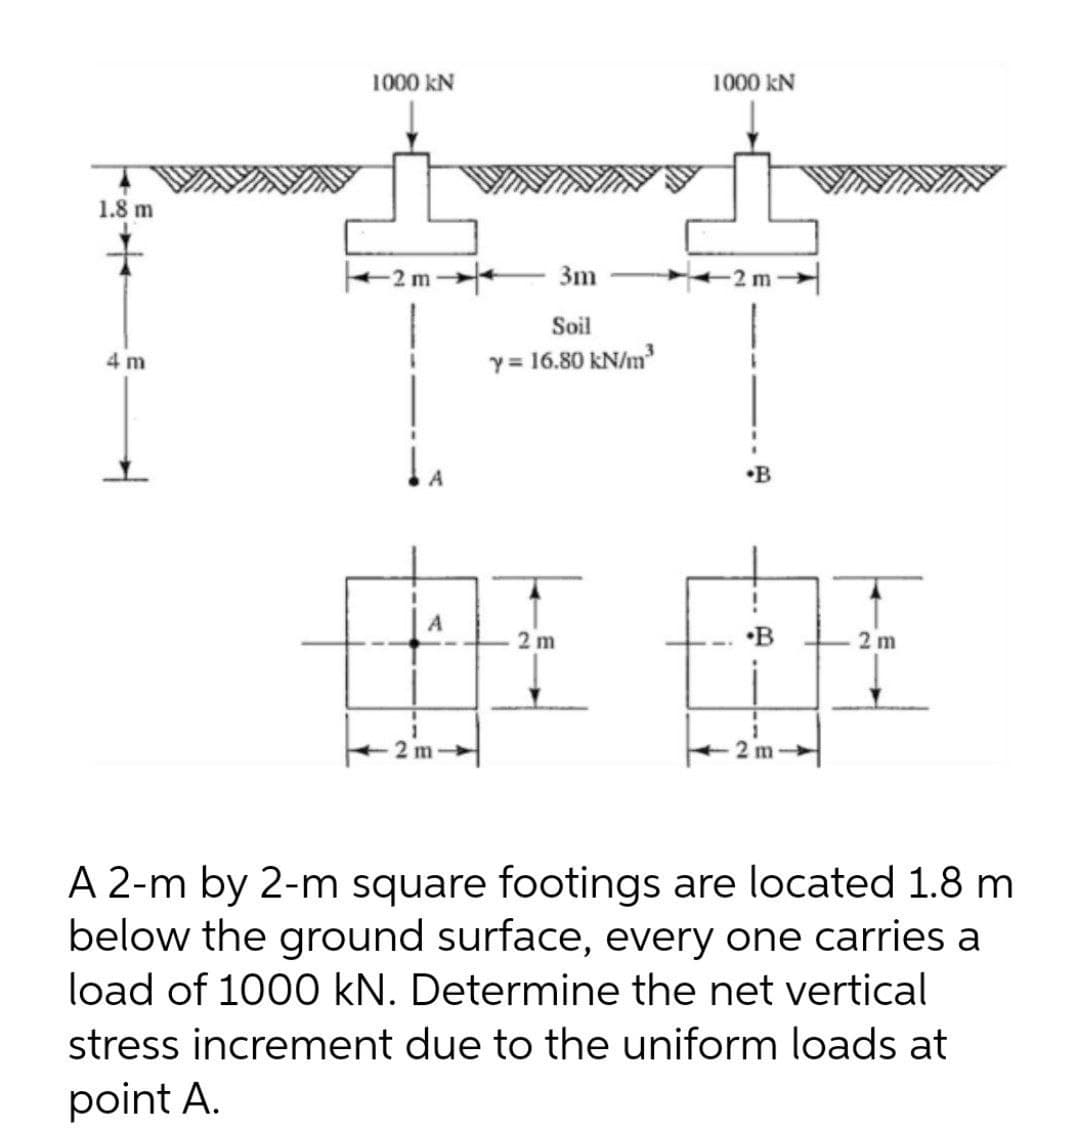 1000 kN
1000 kN
1.8 m
3m
2 m
Soil
y = 16.80 kN/m
4 m
•B
A
2 m
•B
2 m
2 m-
2 m
A 2-m by 2-m square footings are located 1.8 m
below the ground surface, every one carries a
load of 1000 kN. Determine the net vertical
stress increment due to the uniform loads at
point A.
